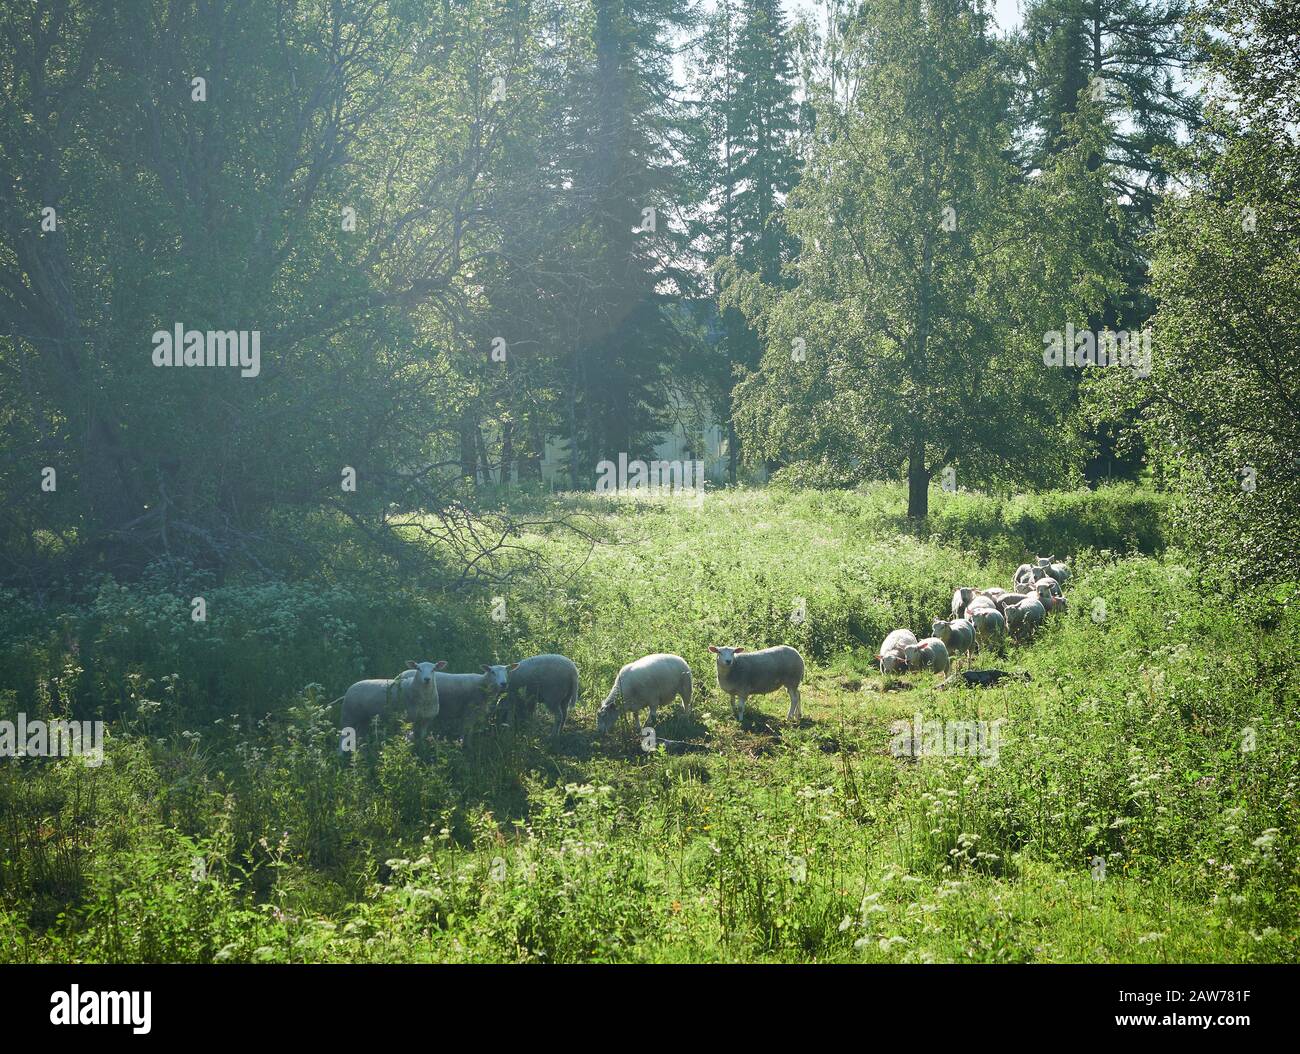 Sheeps and lambs on a meadow with green grass. Flock of sheep in sun rays on green summer background. Stock Photo